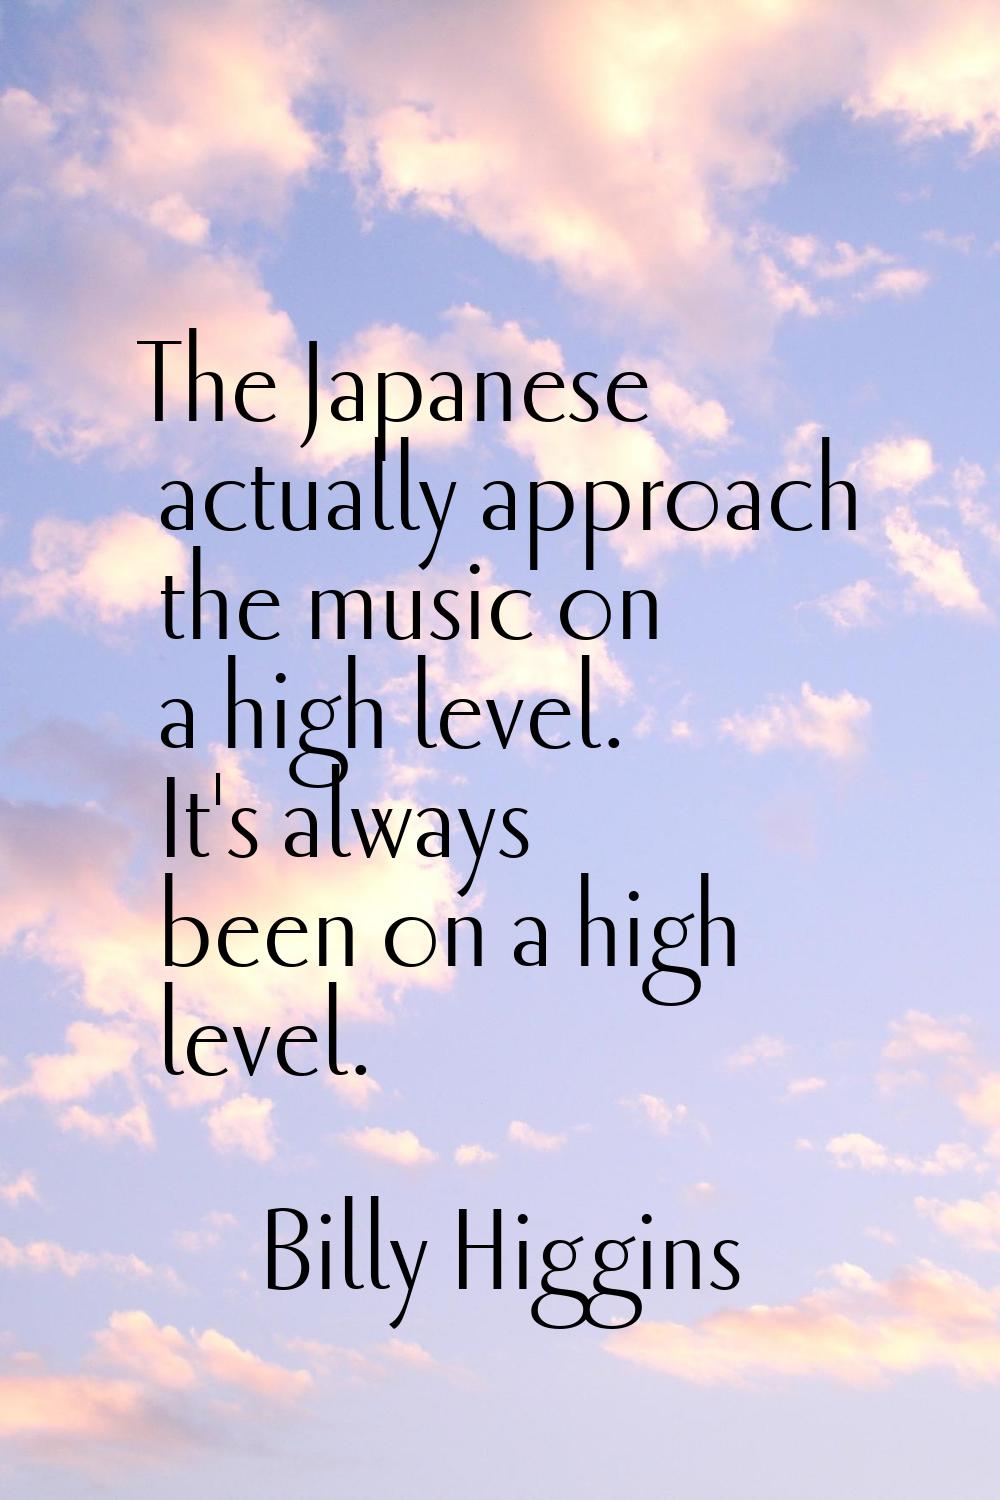 The Japanese actually approach the music on a high level. It's always been on a high level.